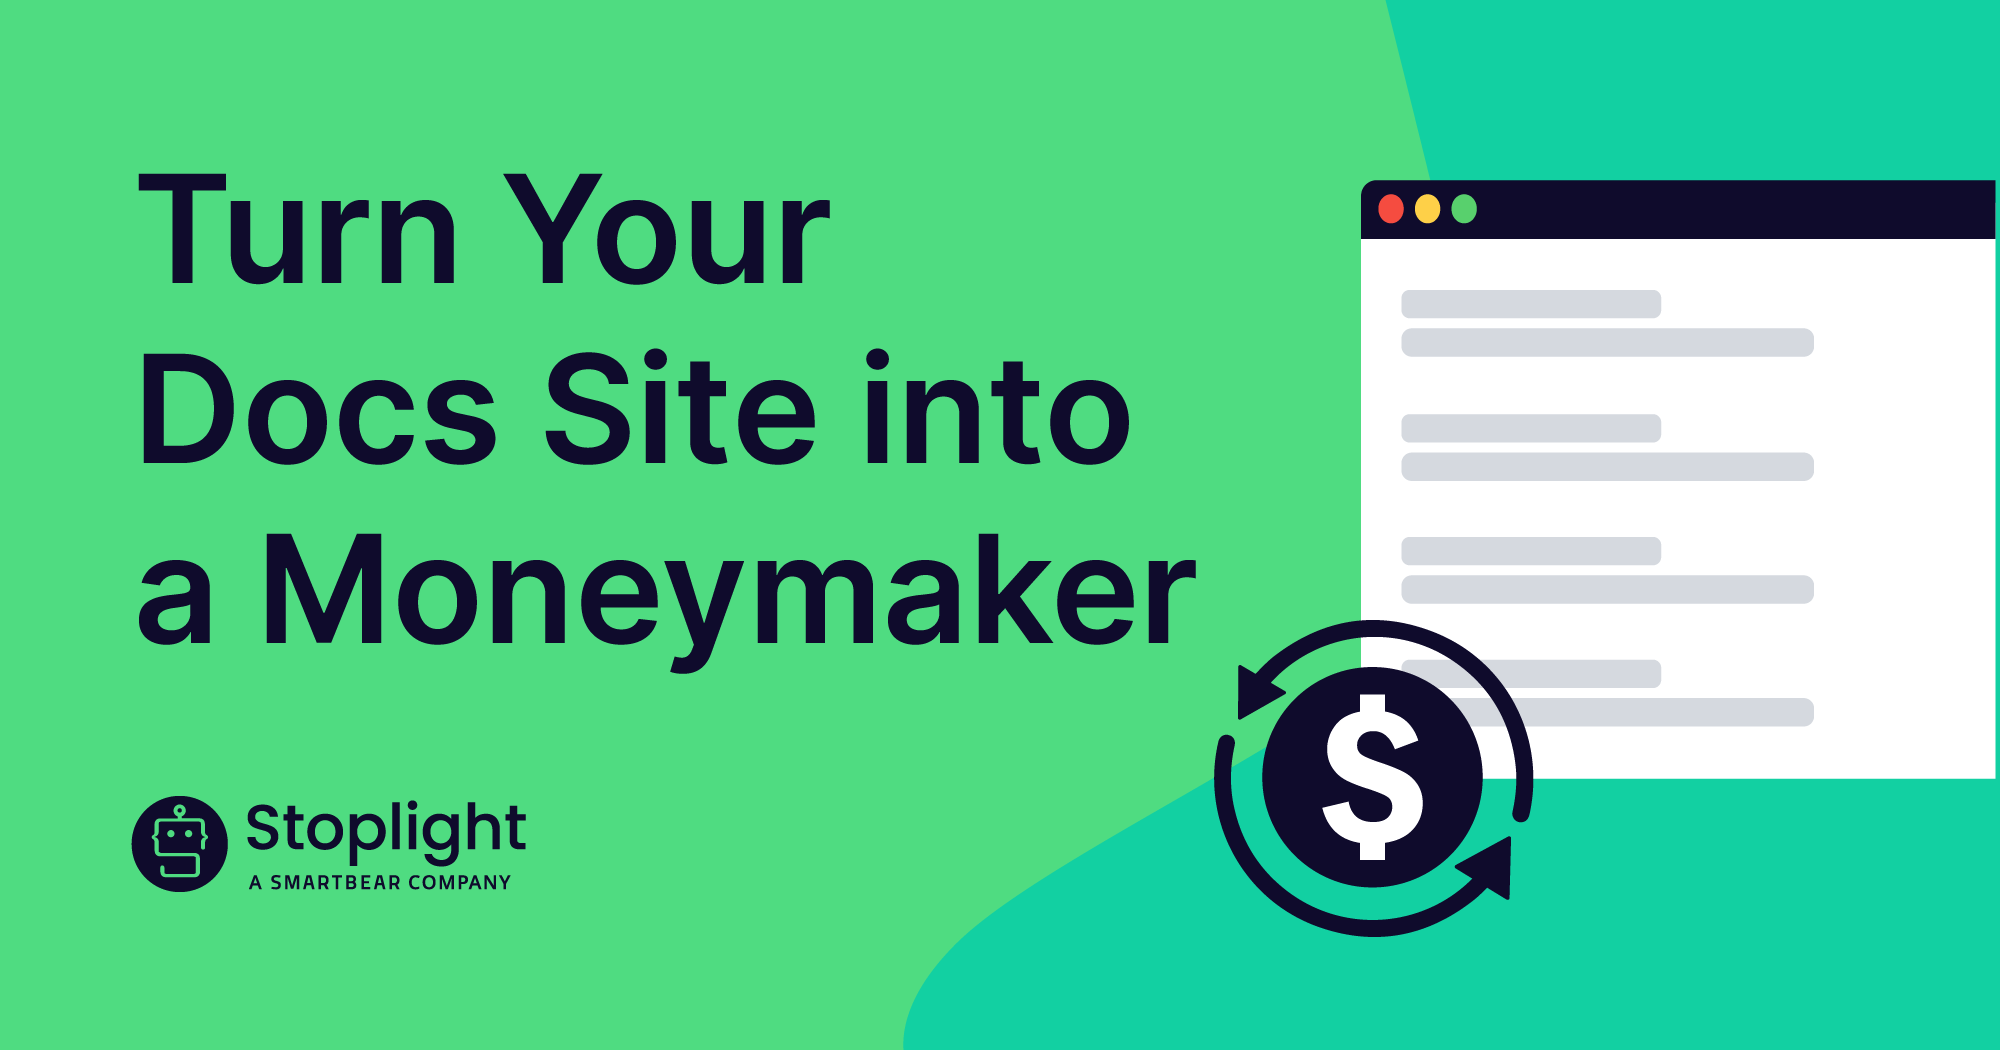 Turn Your Docs Site into a Moneymaker